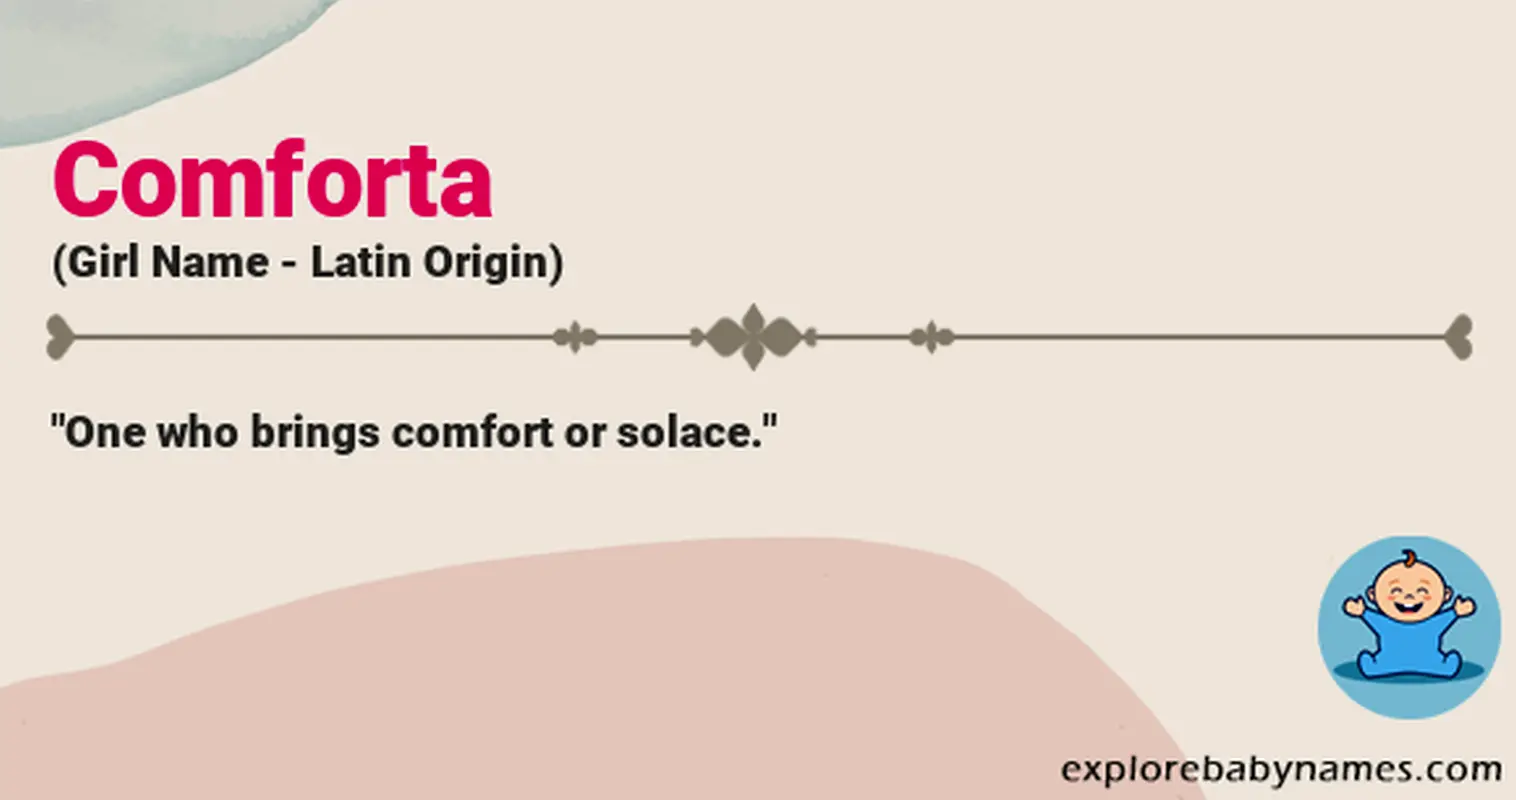 Meaning of Comforta